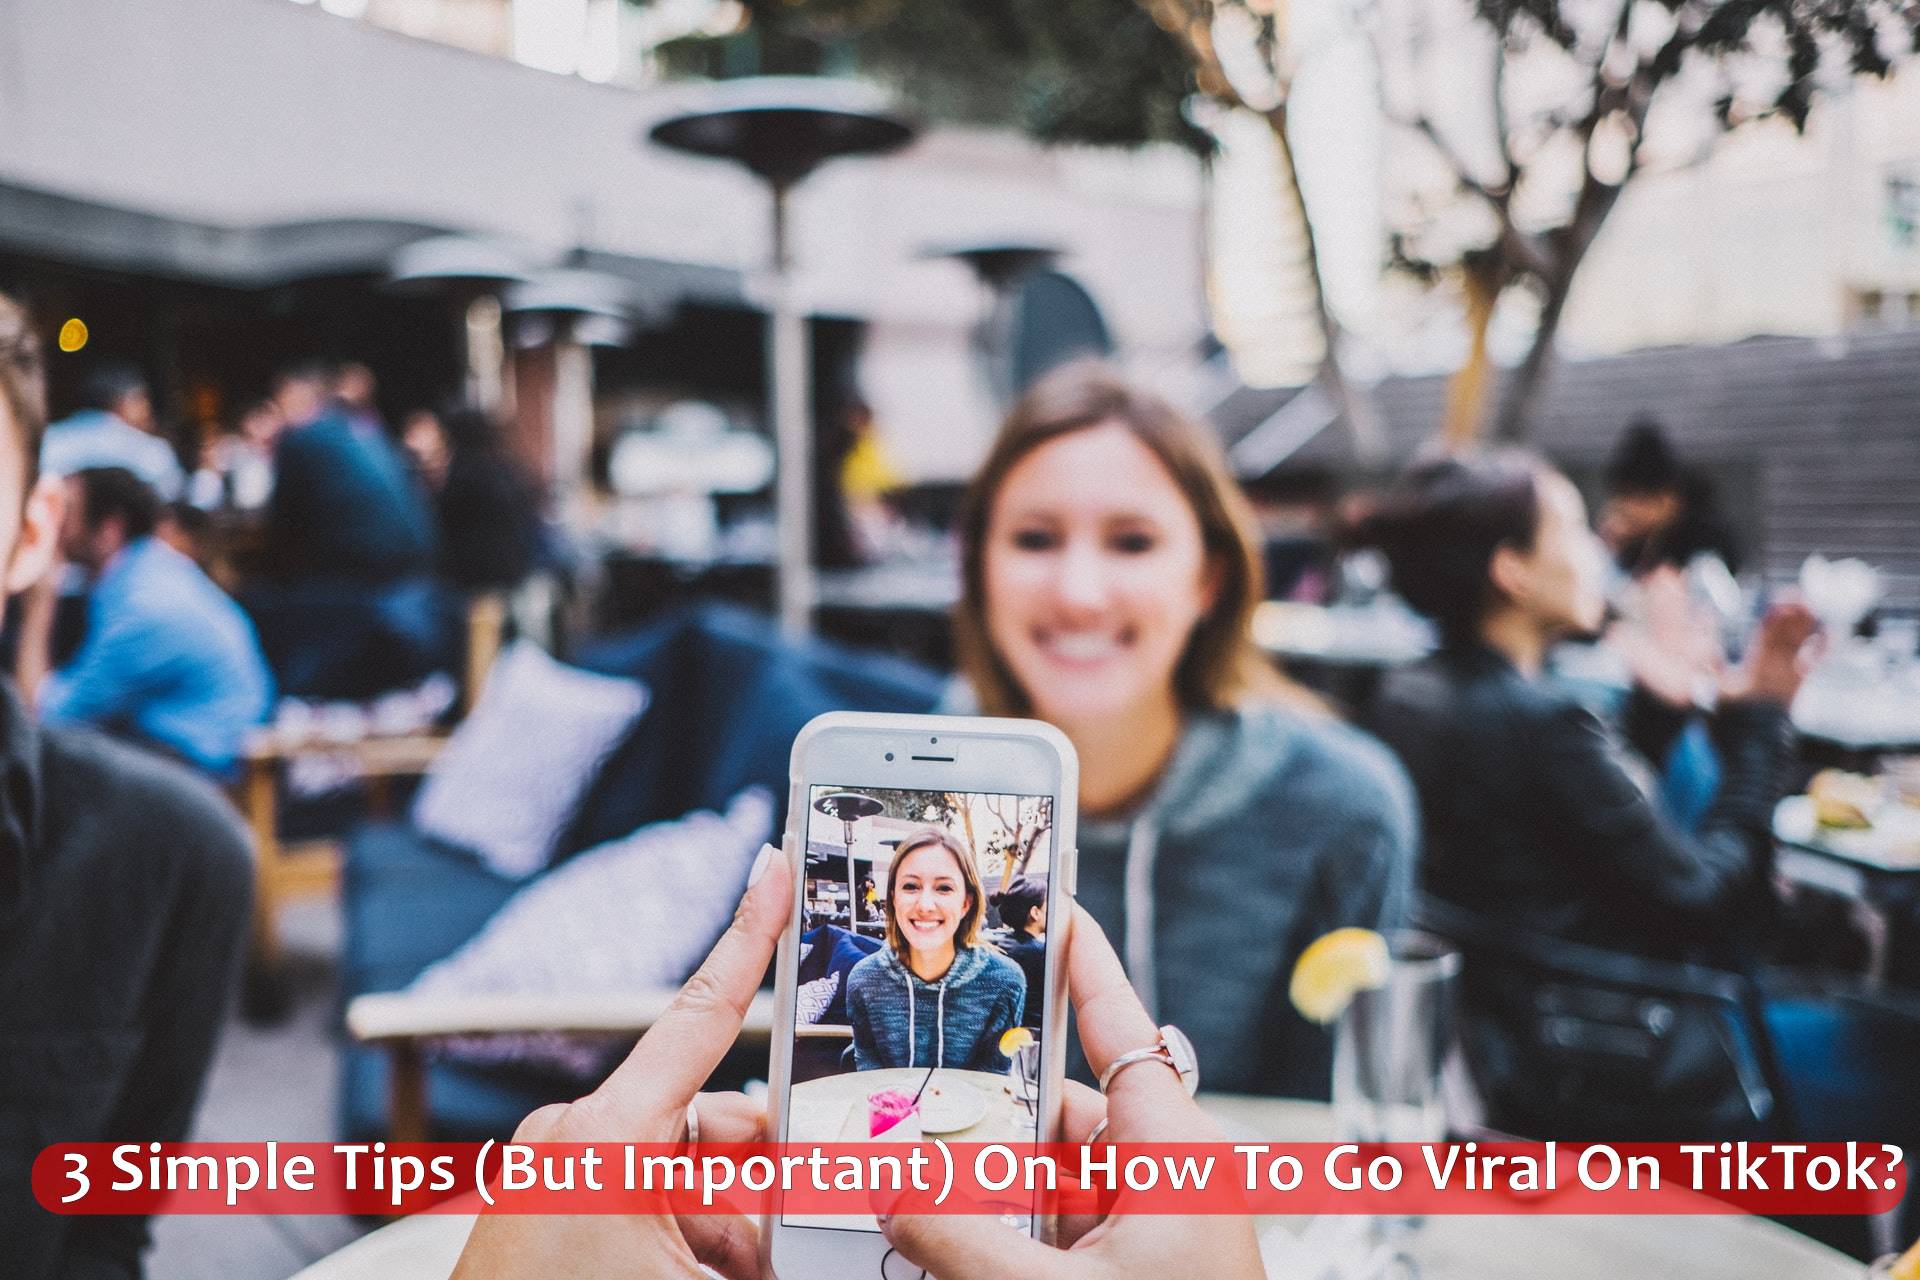 3 Simple Tips But Important On How To Go Viral On TikTok